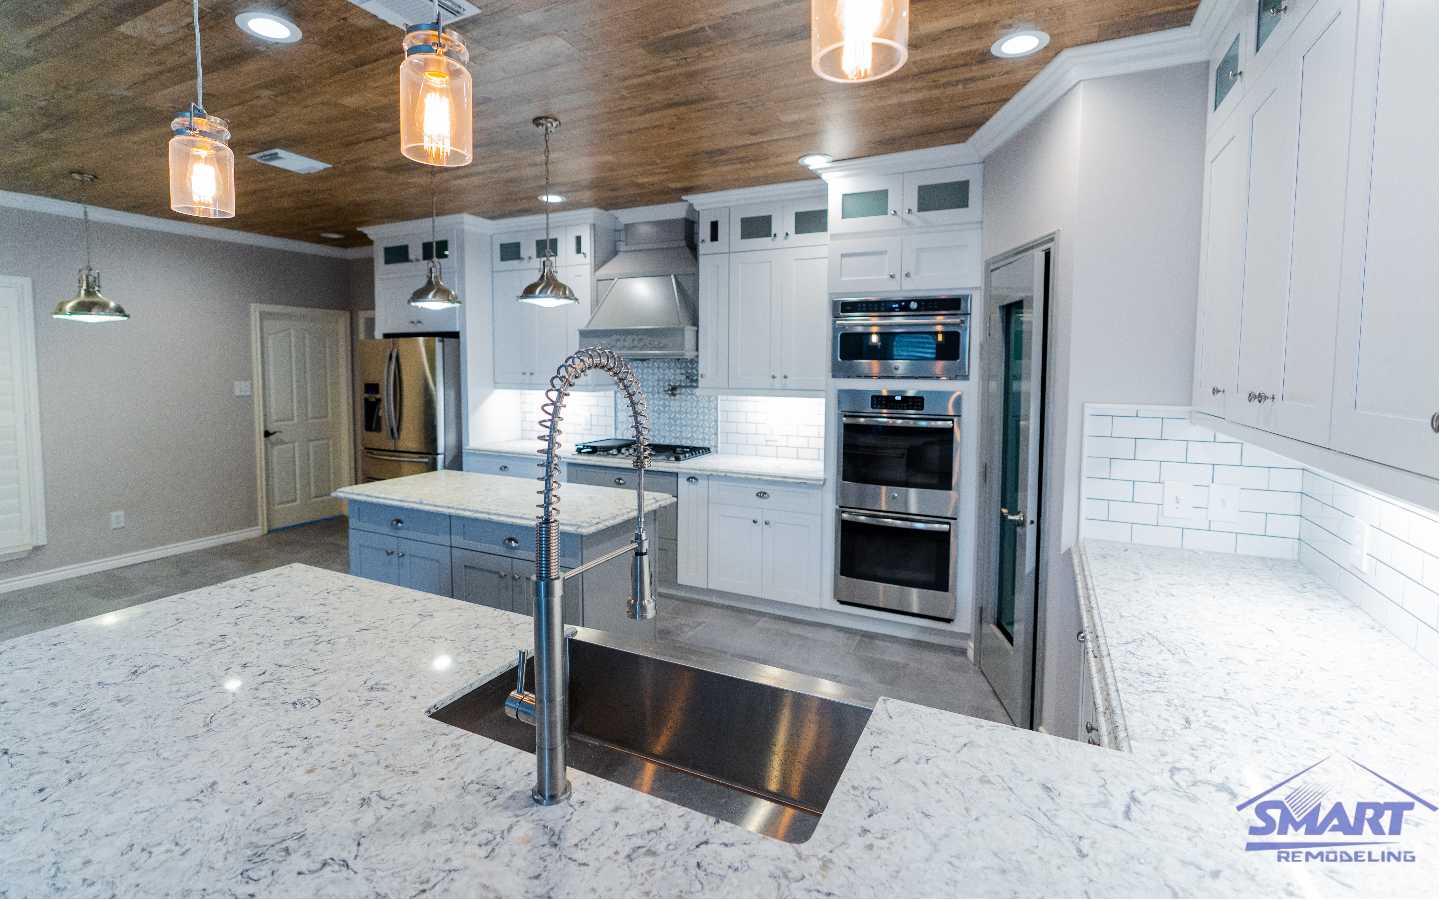 The best affordable kitchen countertops in Houston